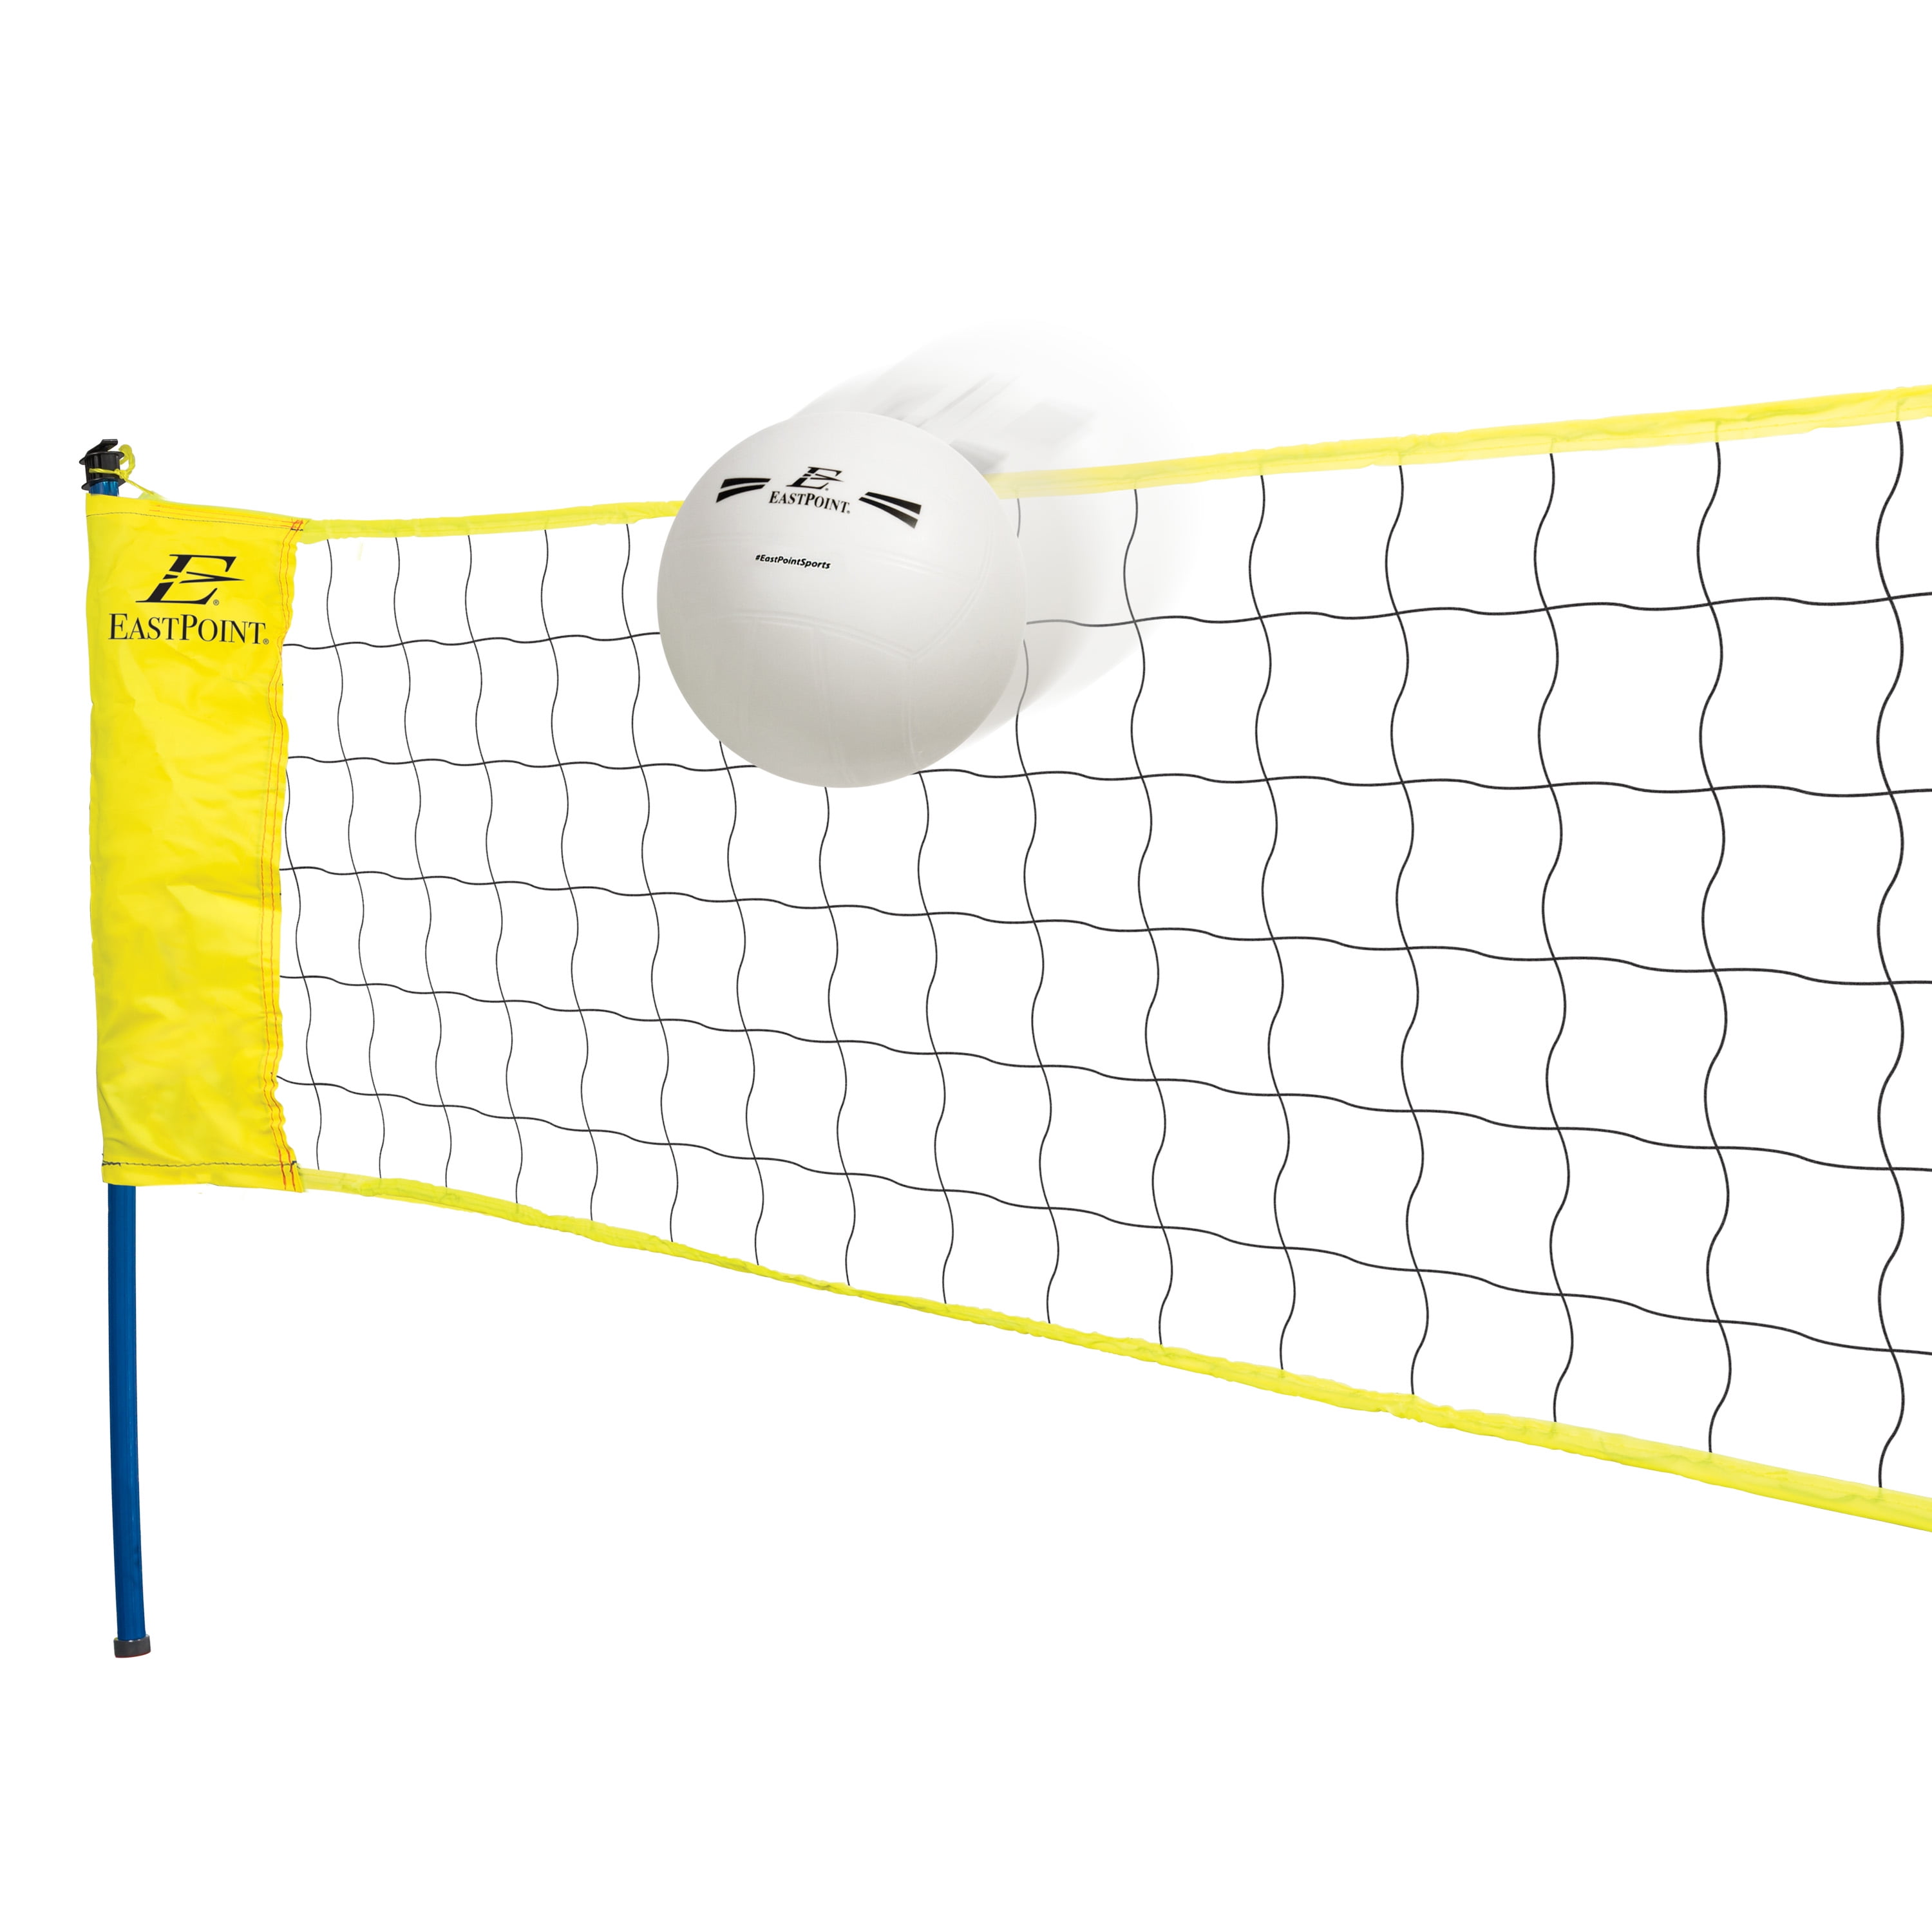 Easy Setup Volleyball Net for Backyard Beach Aluminum Poles + Volleyball Net + Volleyball + Pump+ Guidelines + Metal Stakes + Boundary Tape + Carrying Bag Sports Volleyball Net and Ball Set 